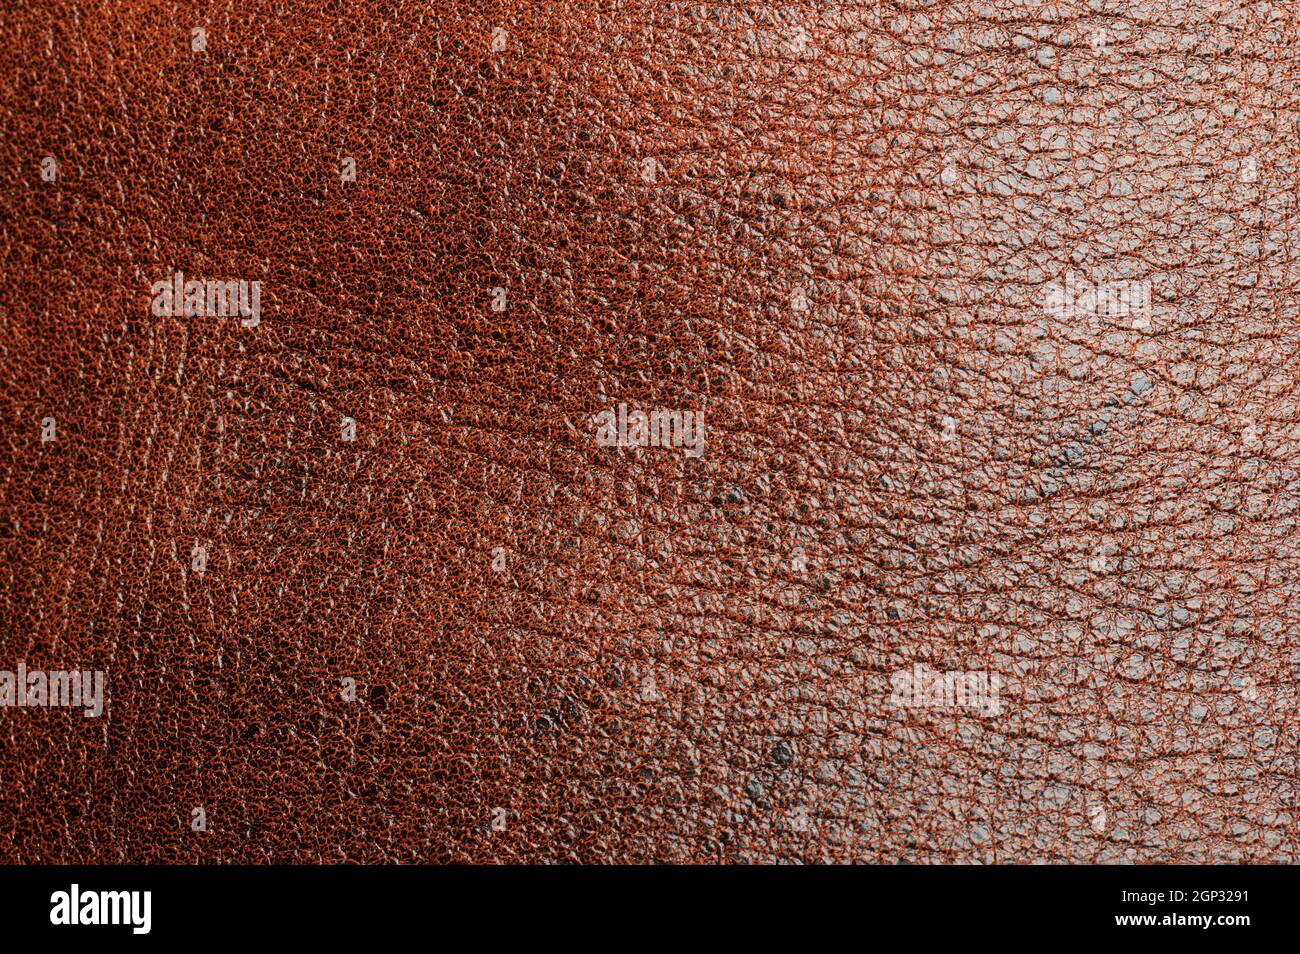 Brown leather surface macro close up view. Seamless beige color skin Stock Photo